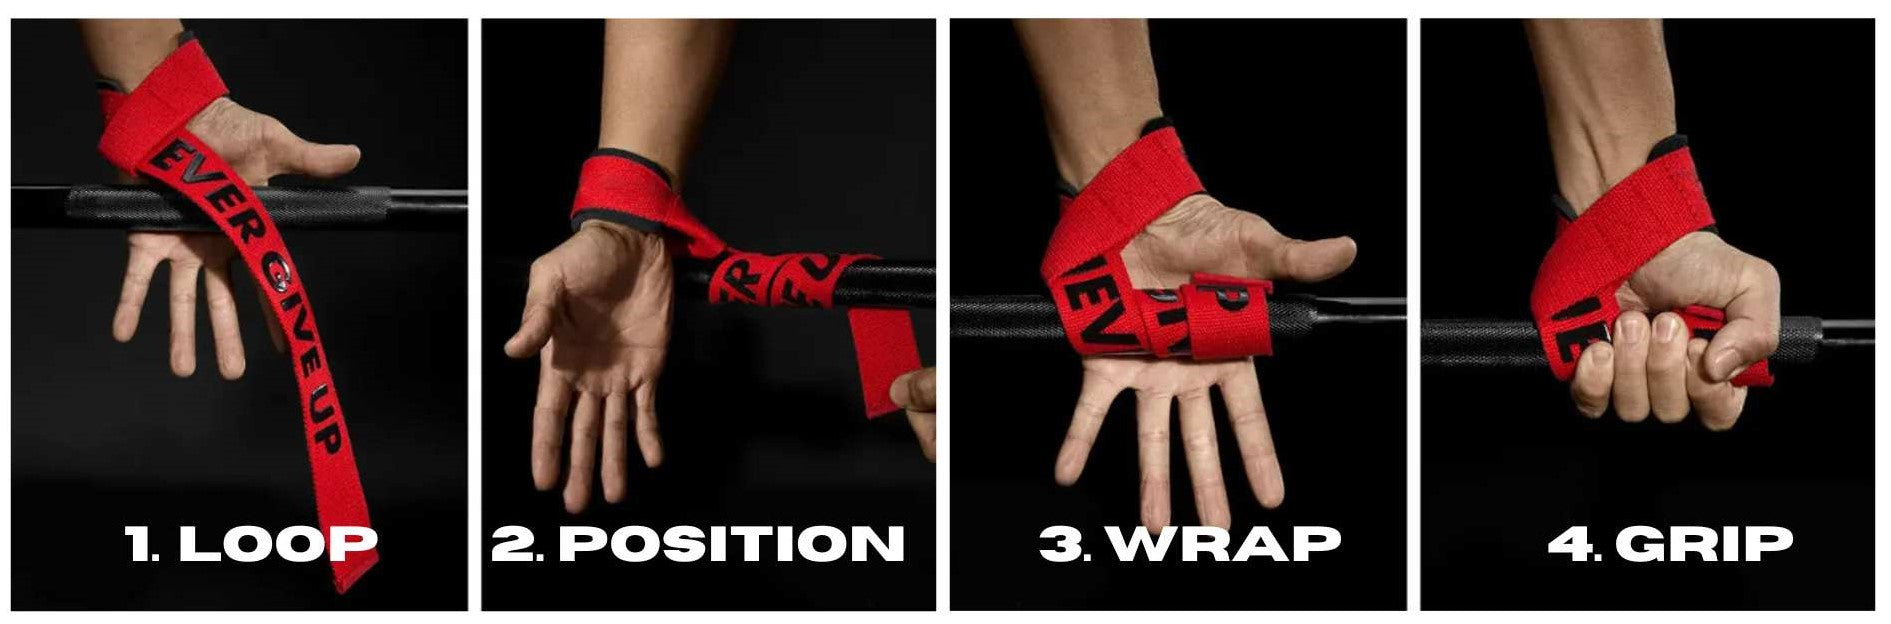 How To Use Lifting Straps Gym